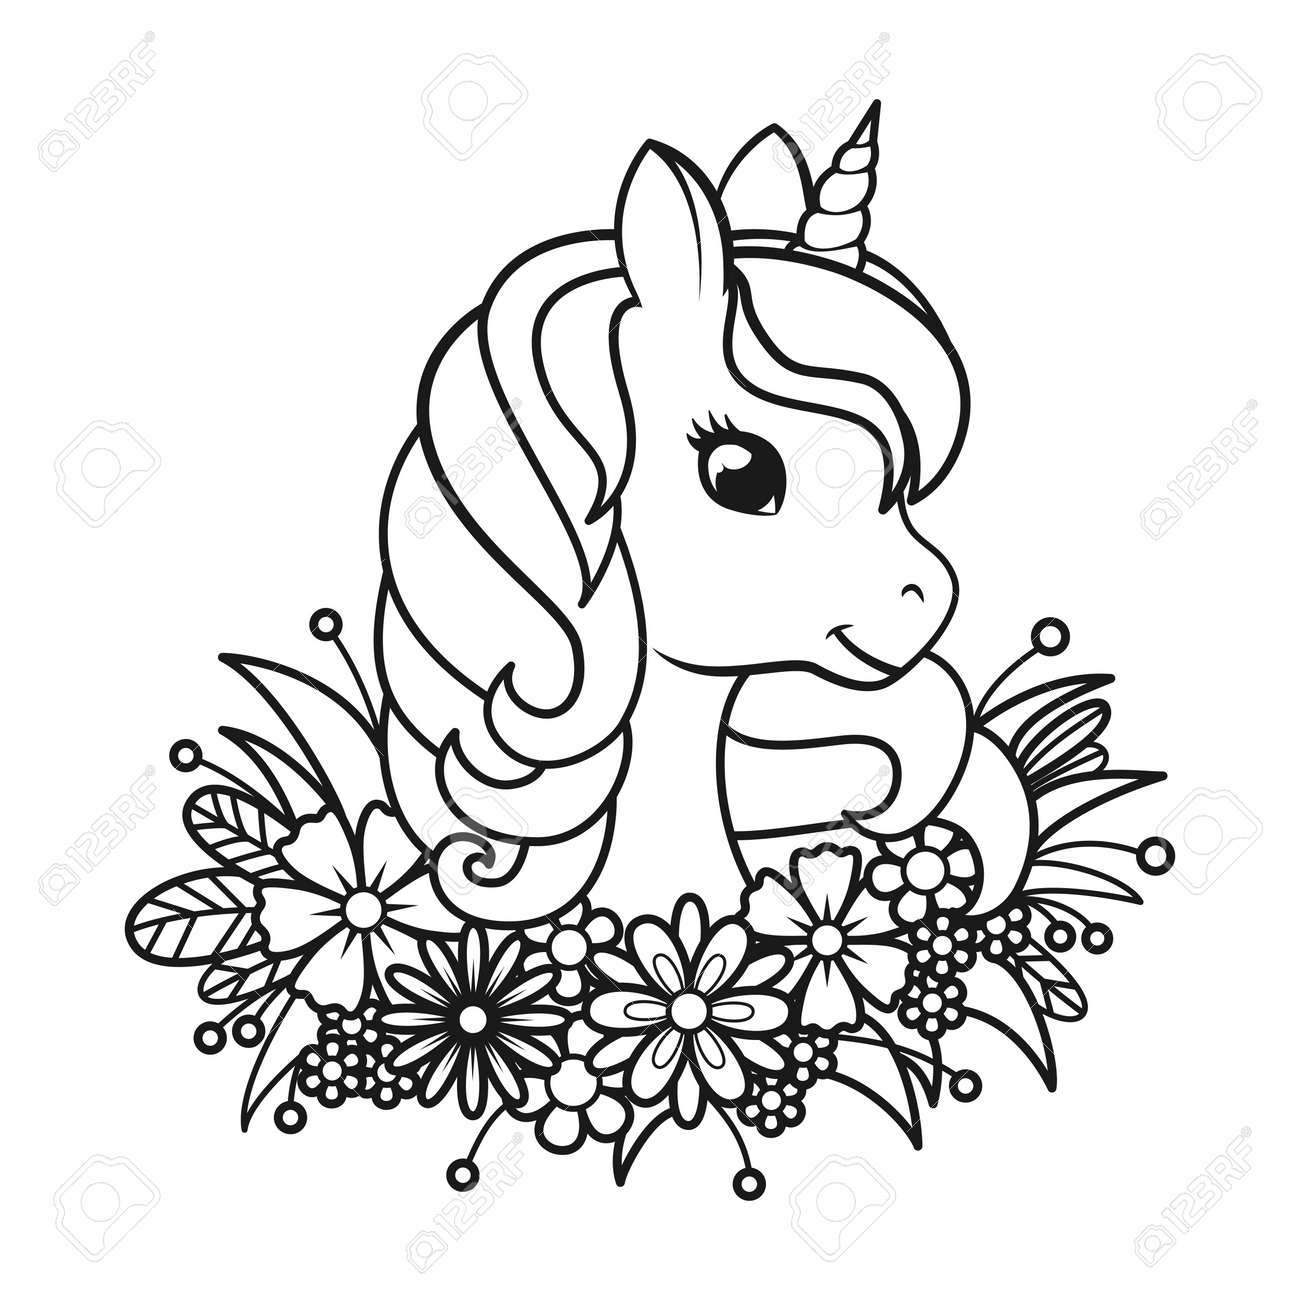 Portrait of a cute unicorn in flowers page for coloring book vector linear illustration isolated on white background royalty free svg cliparts vectors and stock illustration image